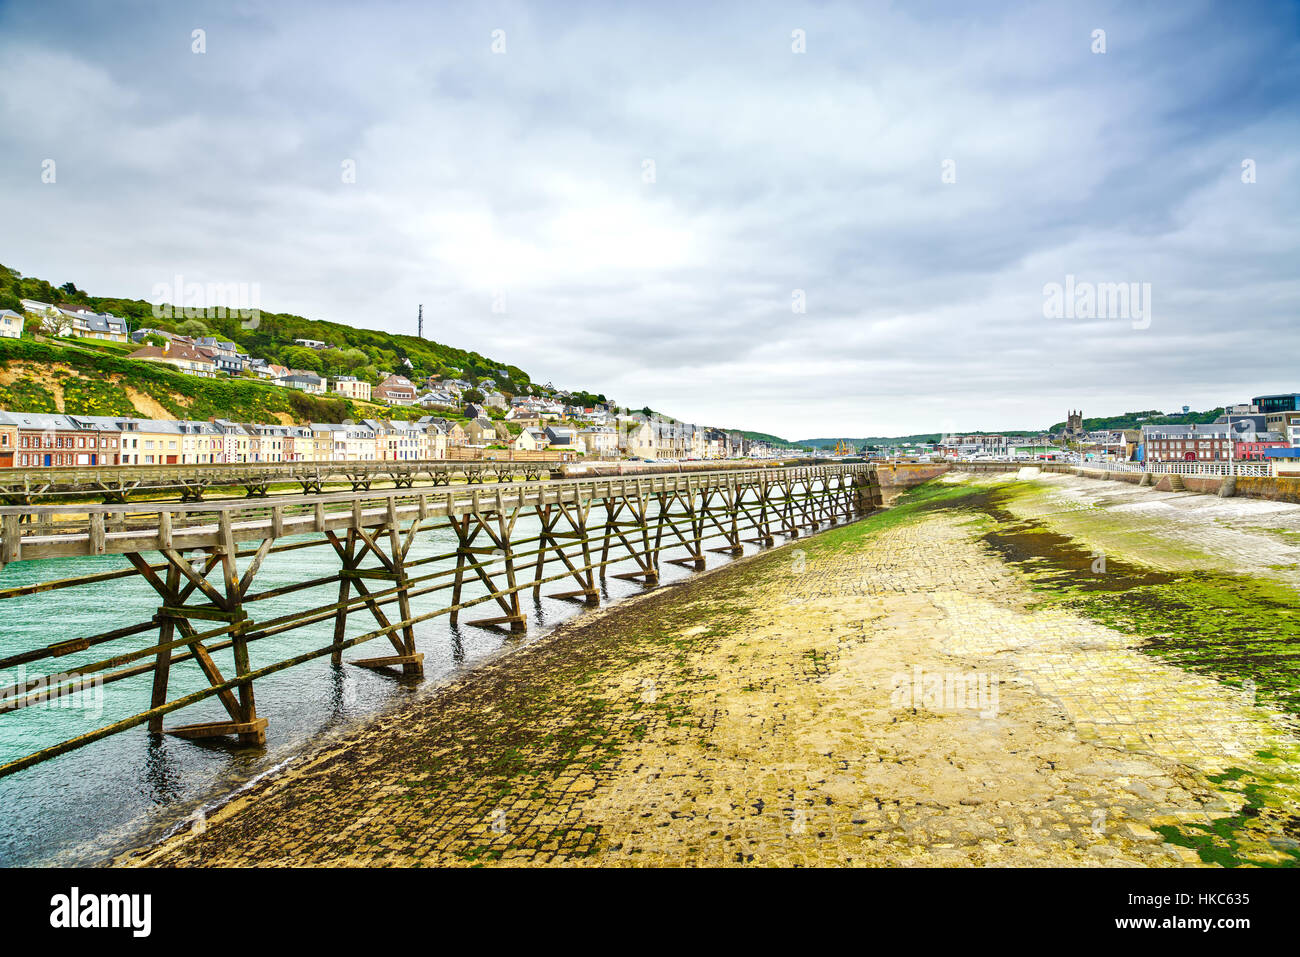 Wooden Pier in Fecamp village harbor. Normandy France, Europe Stock Photo